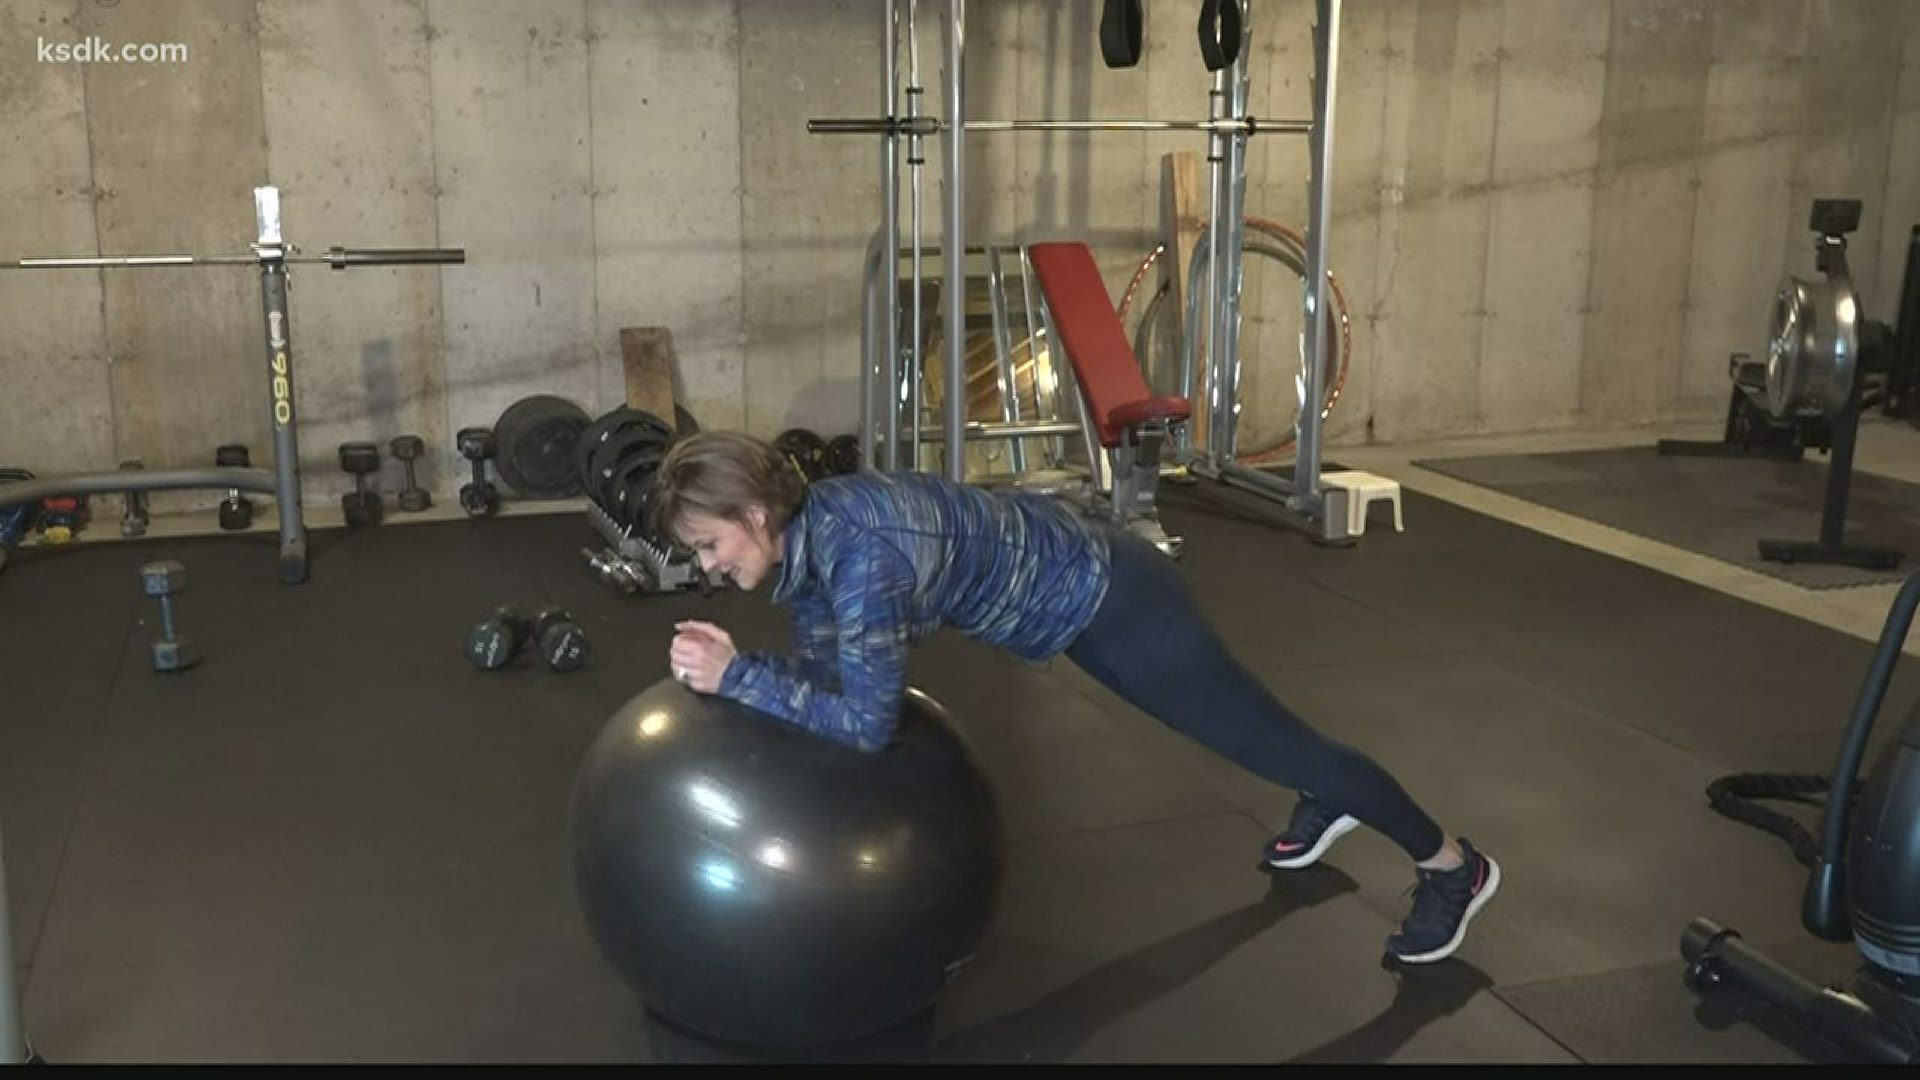 Here's how to incorporate a fitness ball into your exercises.